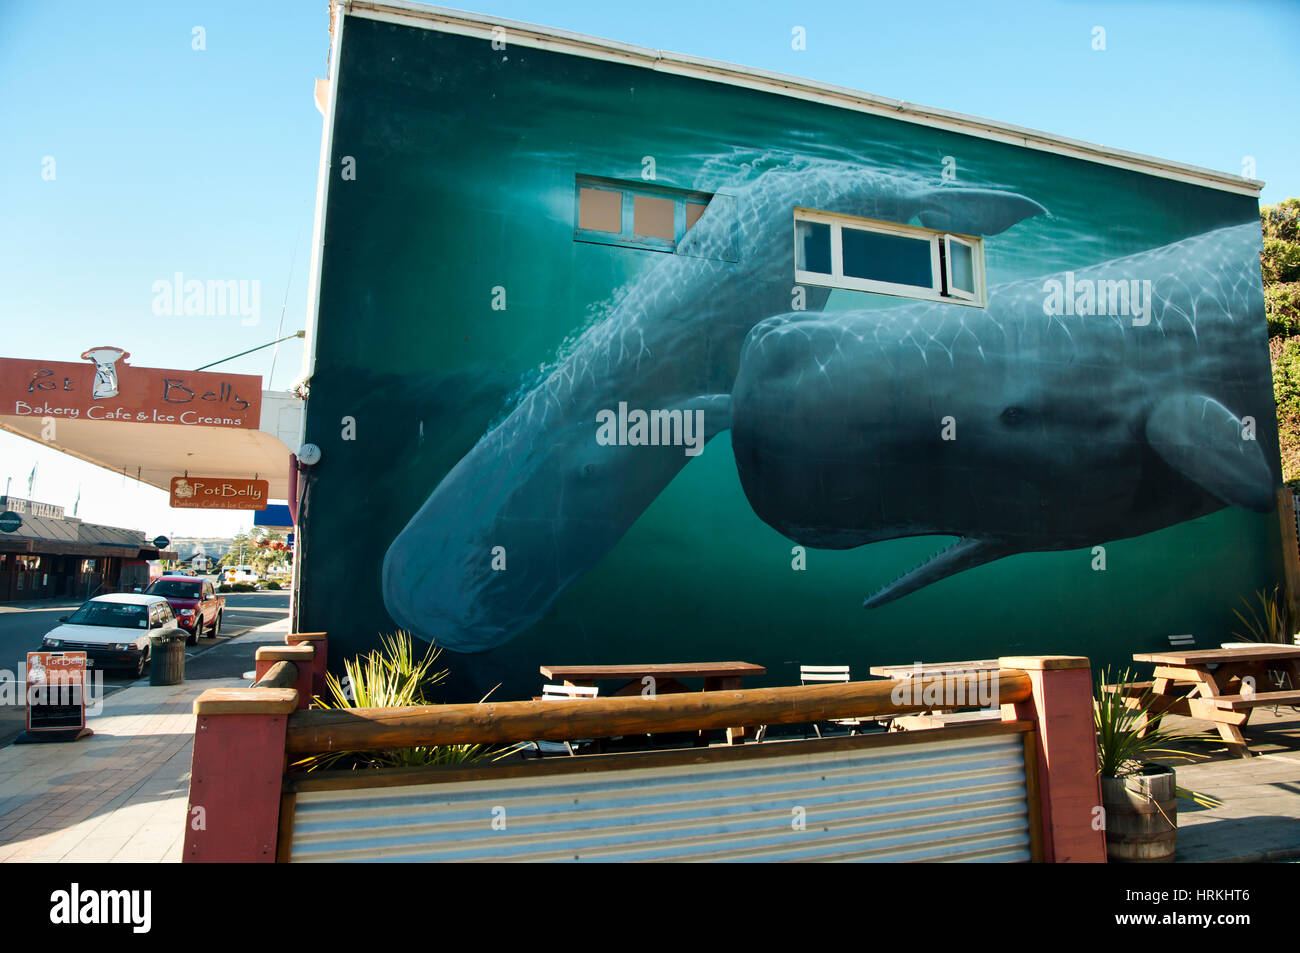 KAIKOURA, NEW ZEALAND - April 3, 2011: Whale painting on a wall in Kaikoura reknown for its whale watching tours Stock Photo